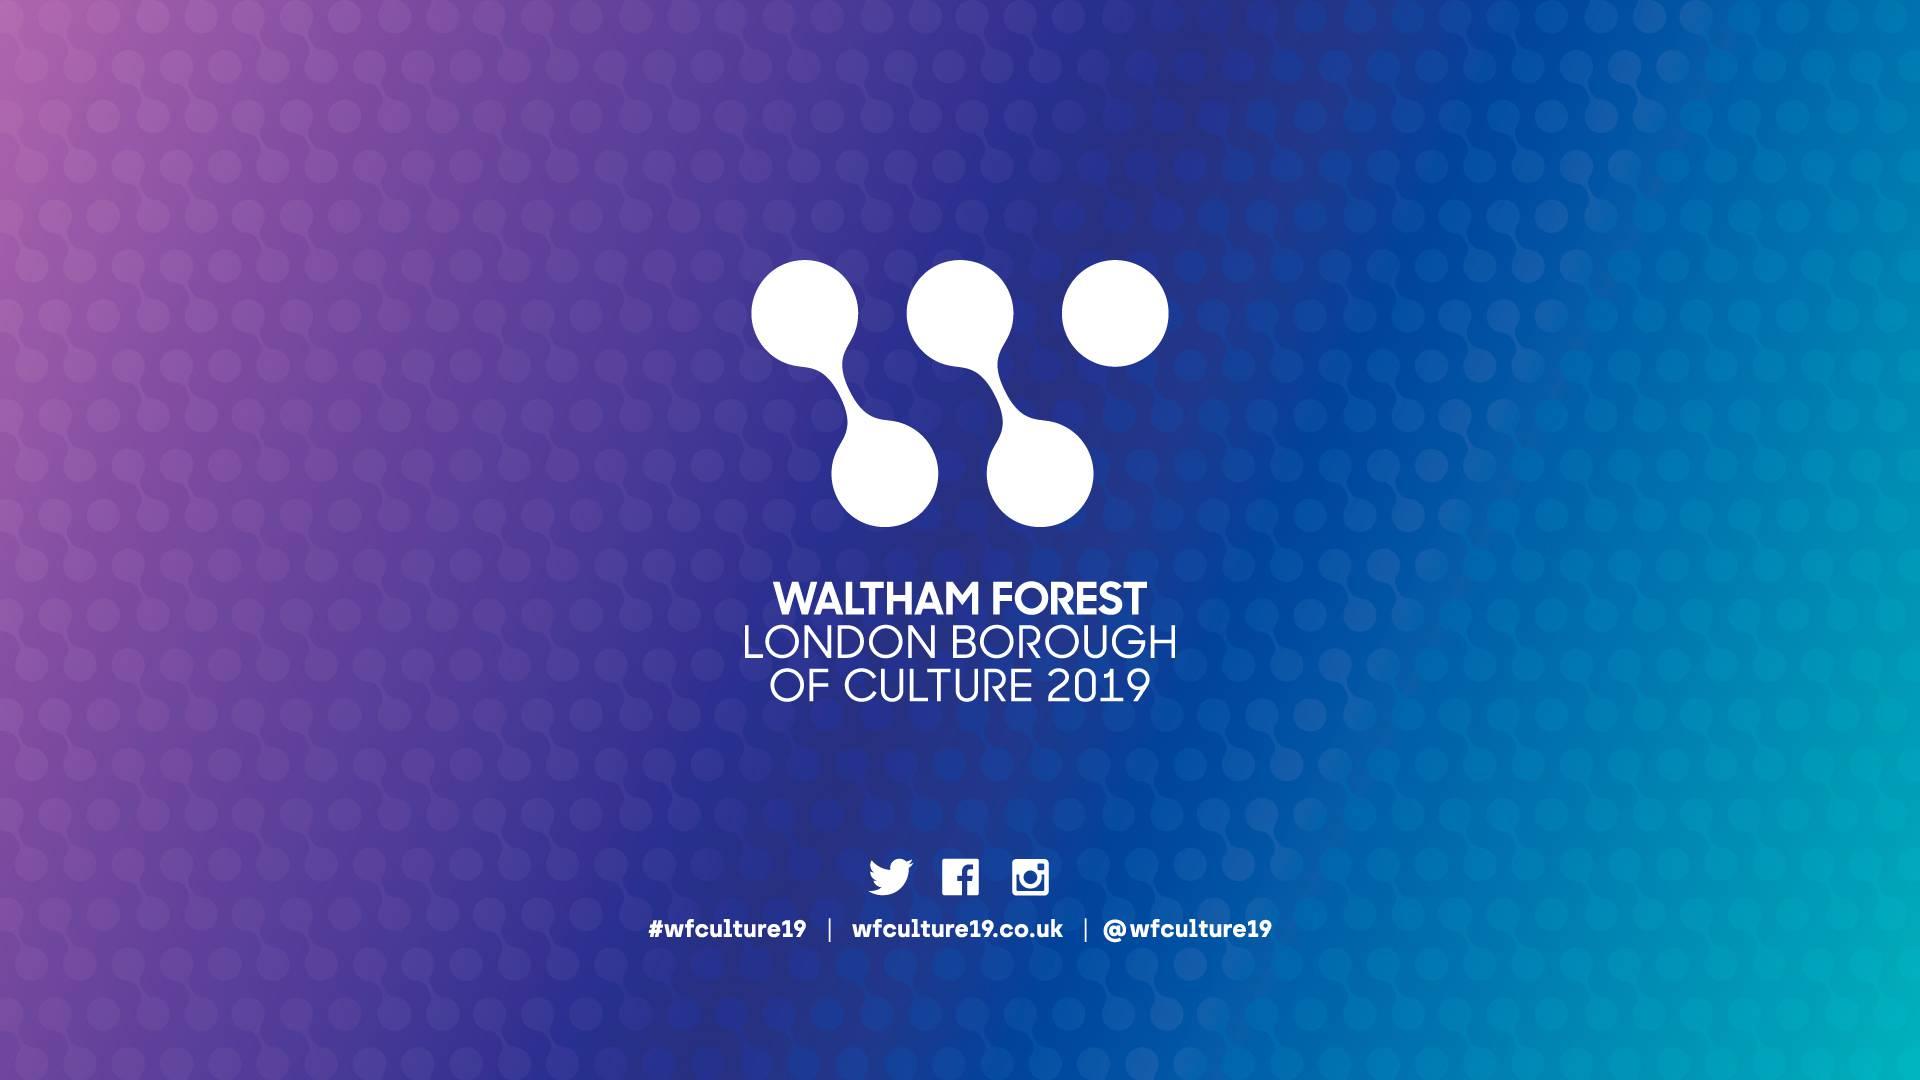 Waltham Forest London Borough of Culture 2019 photo